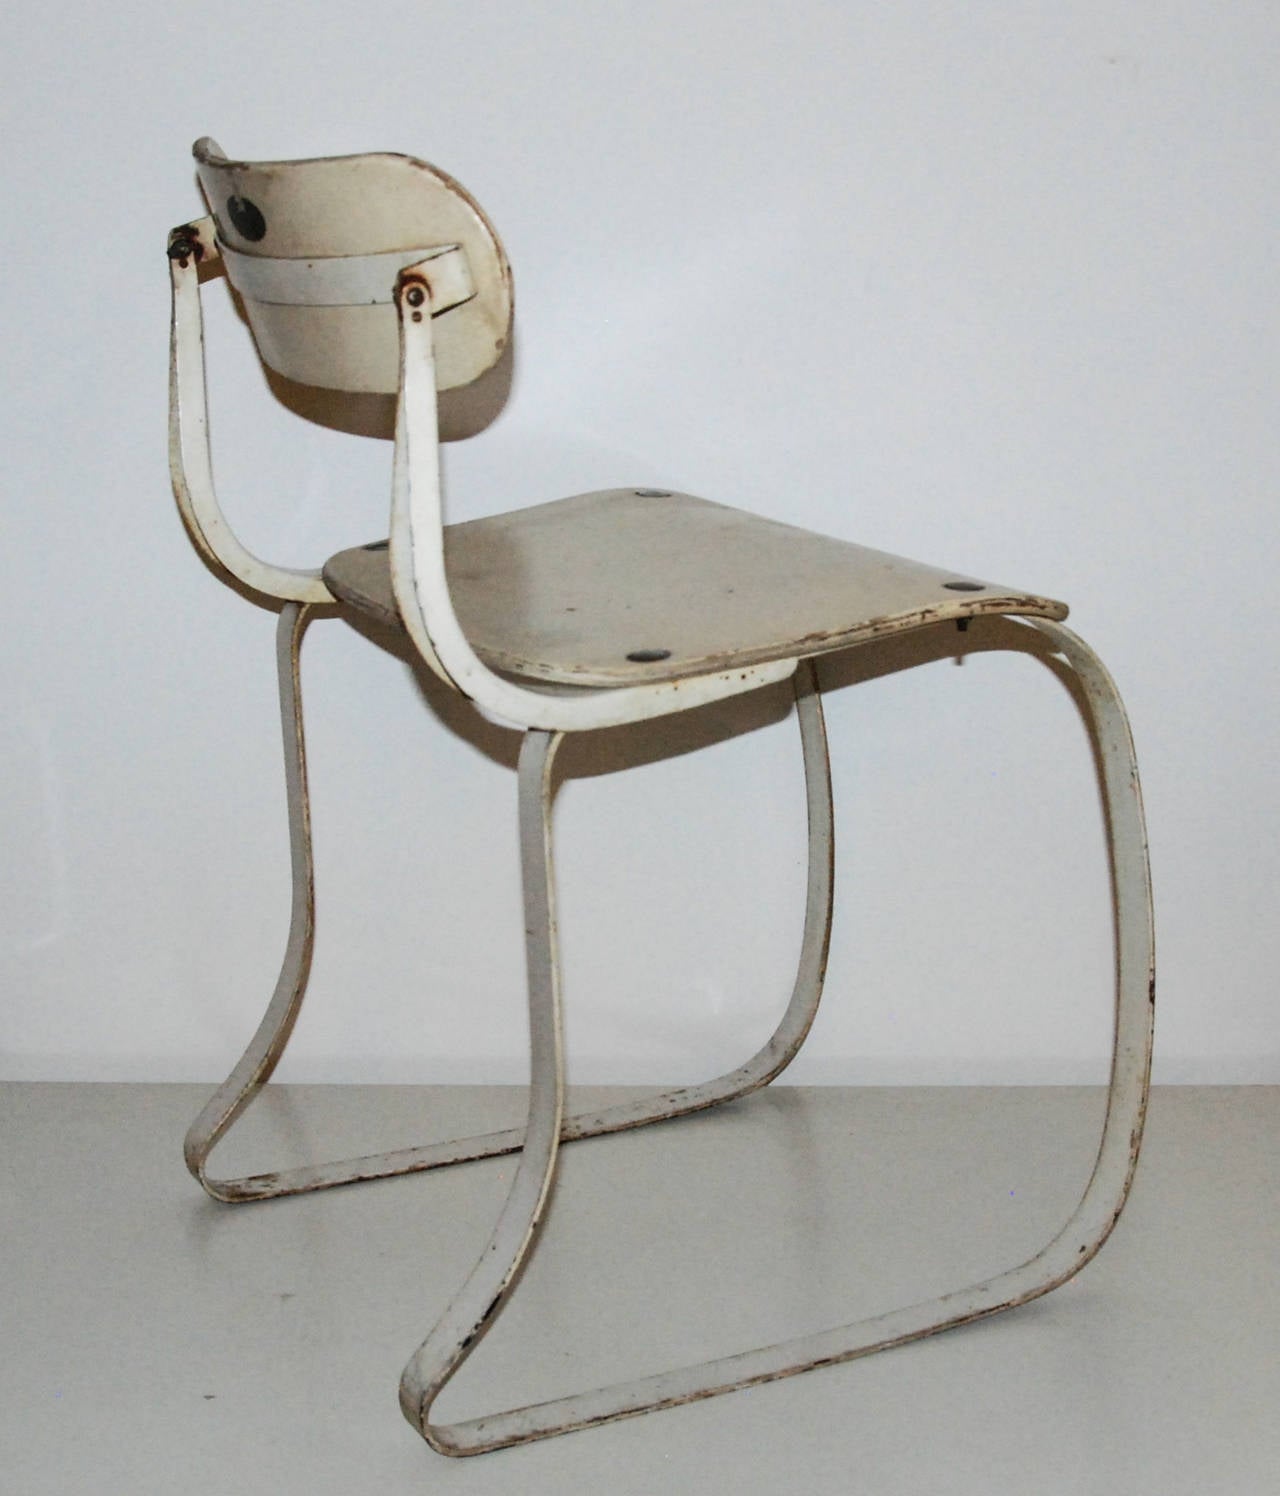 A fine and early example of the Health Chair designed for industrial machine operators.  The laminated plywood on the seat and back were later replaced with stamped metal in the 1940s. The back pivots and has an applied decal with patent no.